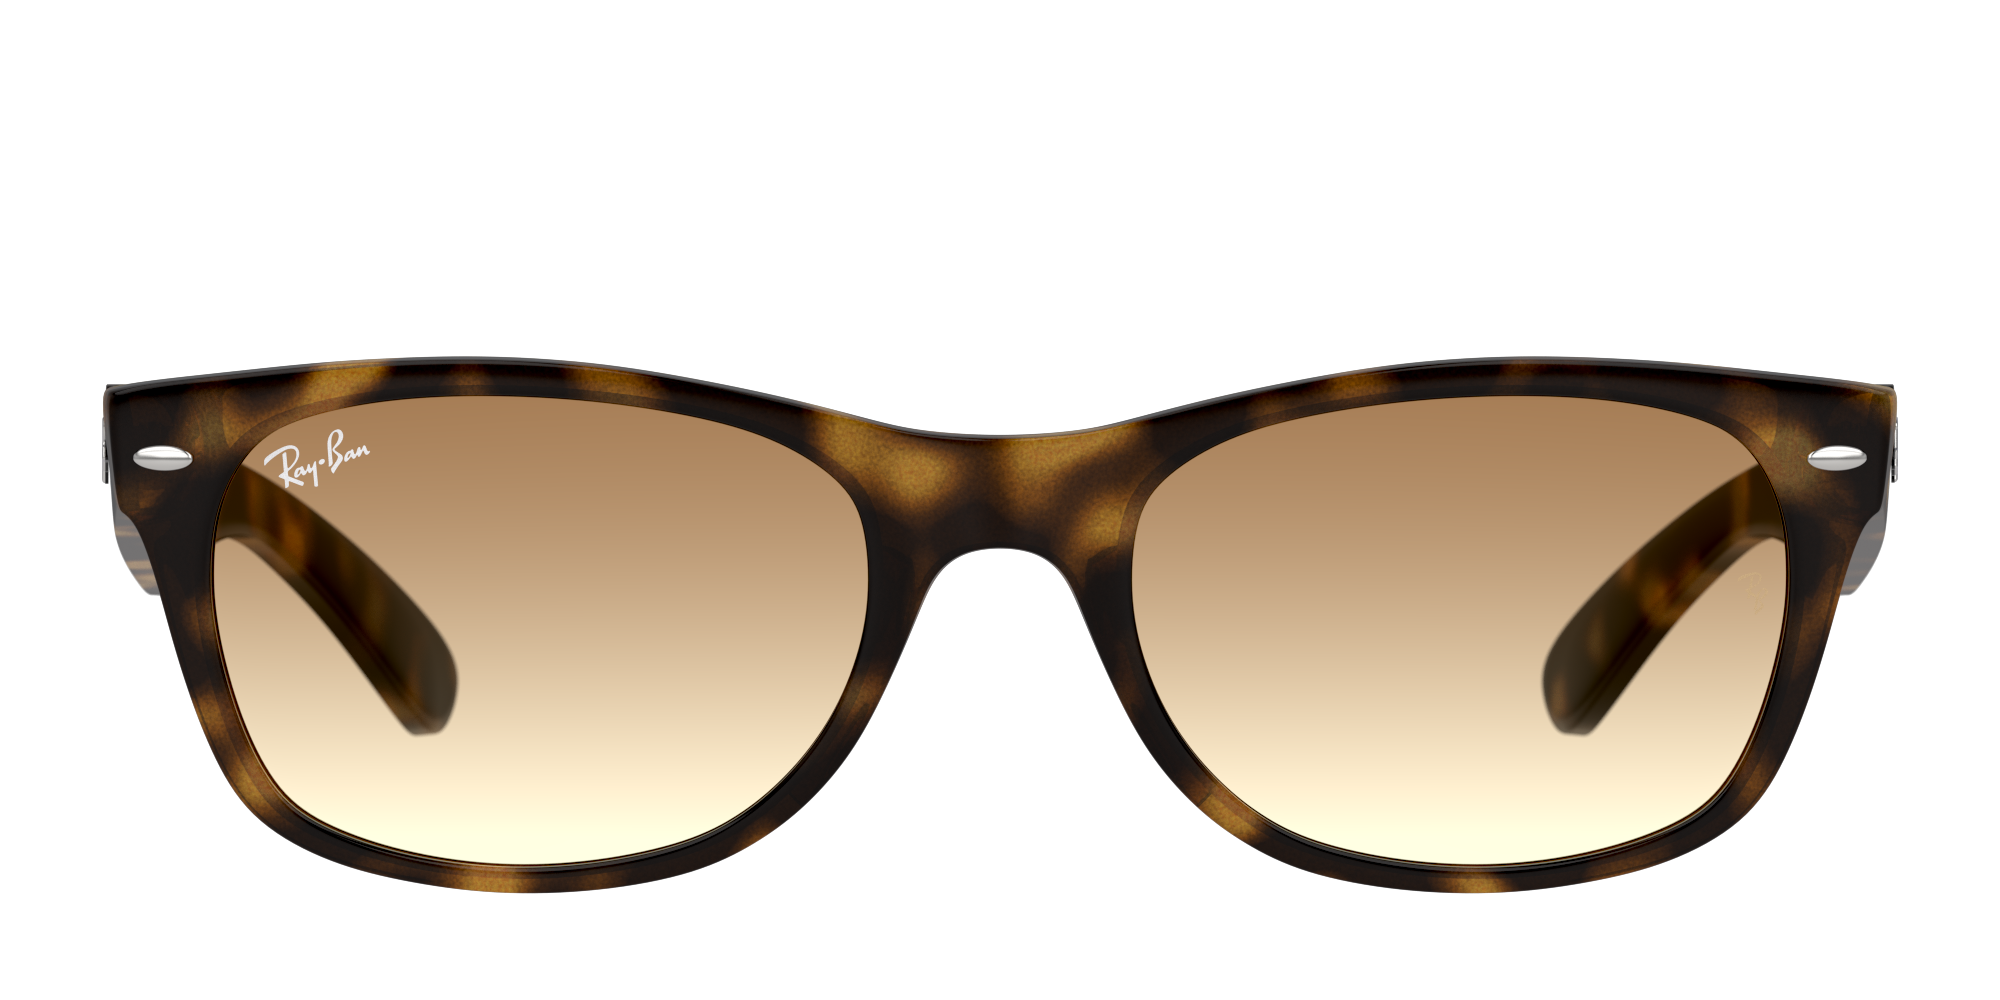 [products.image.front] Ray-Ban New Wayfarer Classic RB2132 710/51